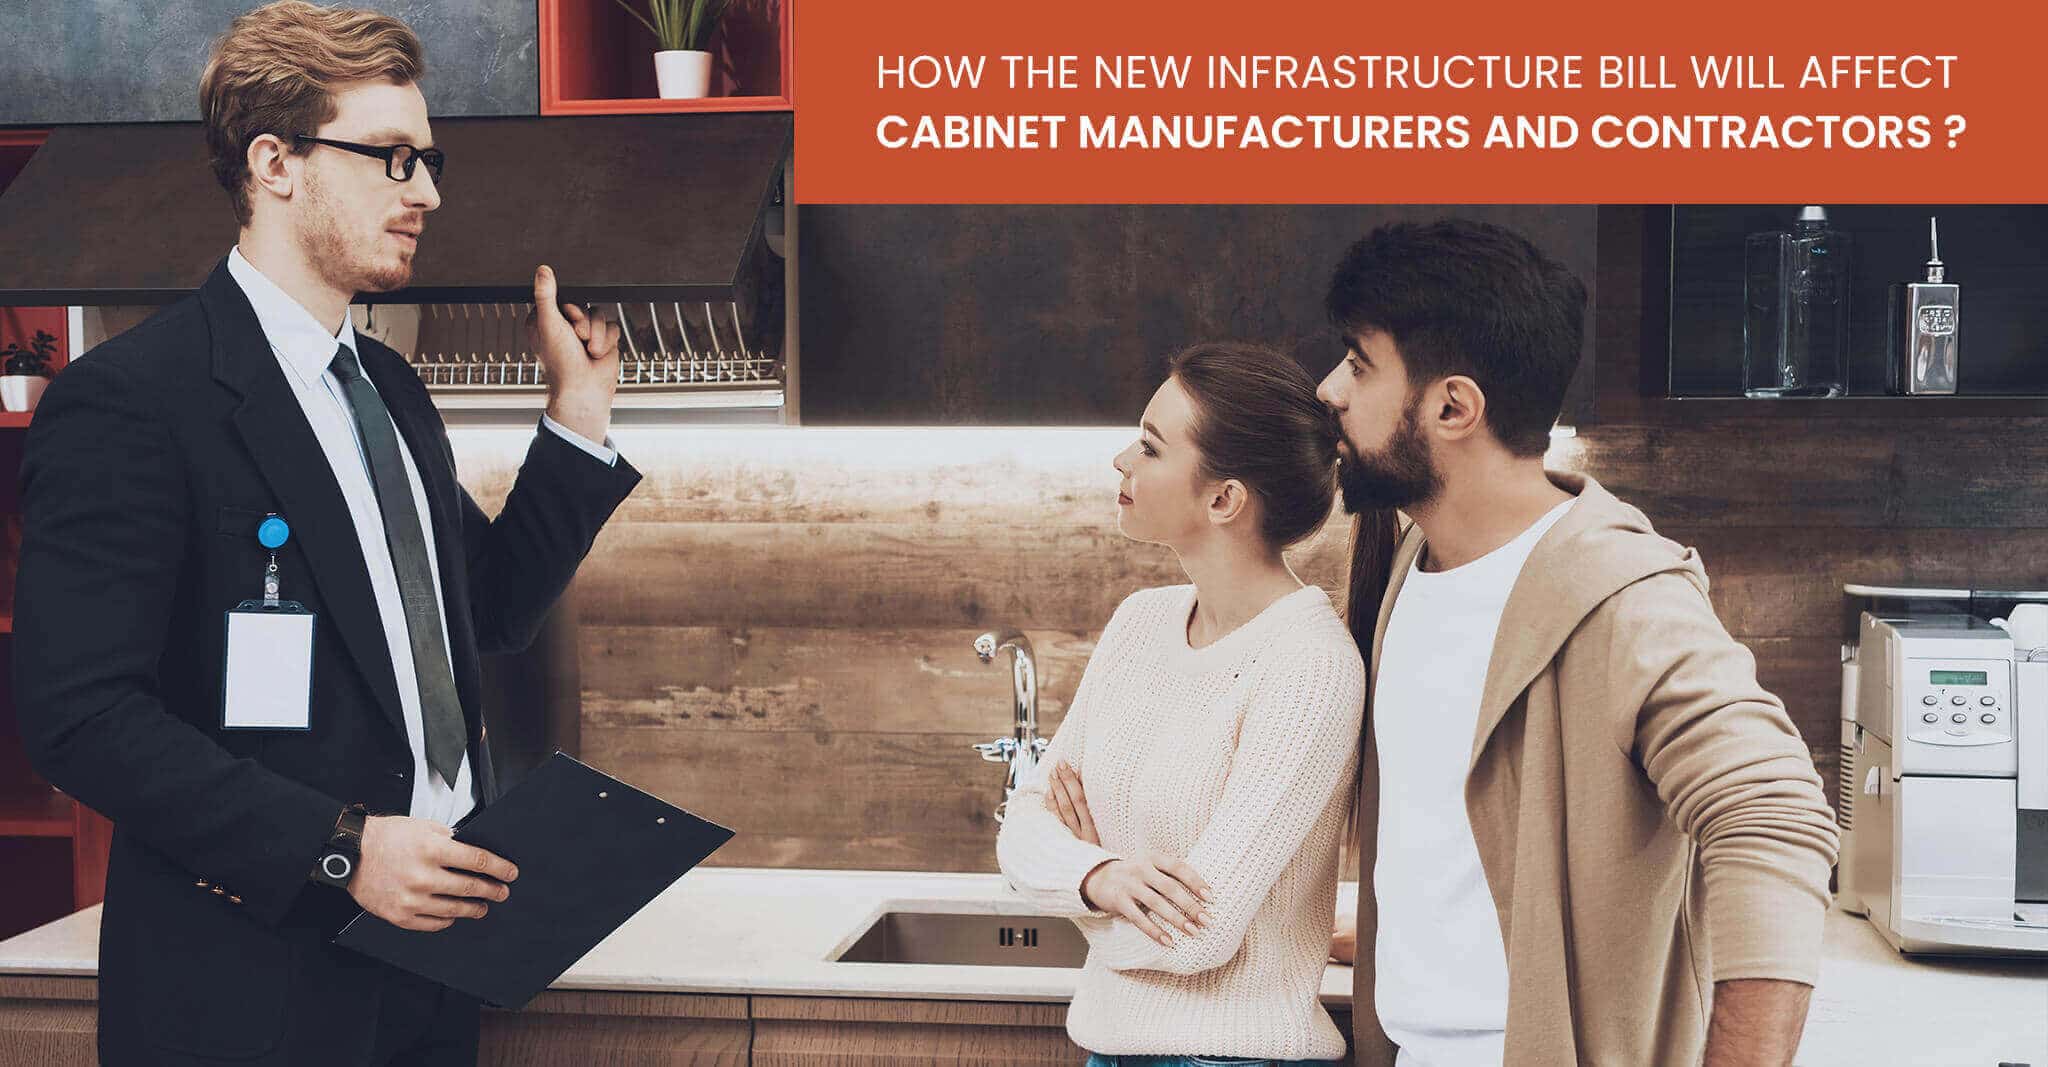 How the New Infrastructure Bill Will Affect Cabinet Manufacturers and Contractors